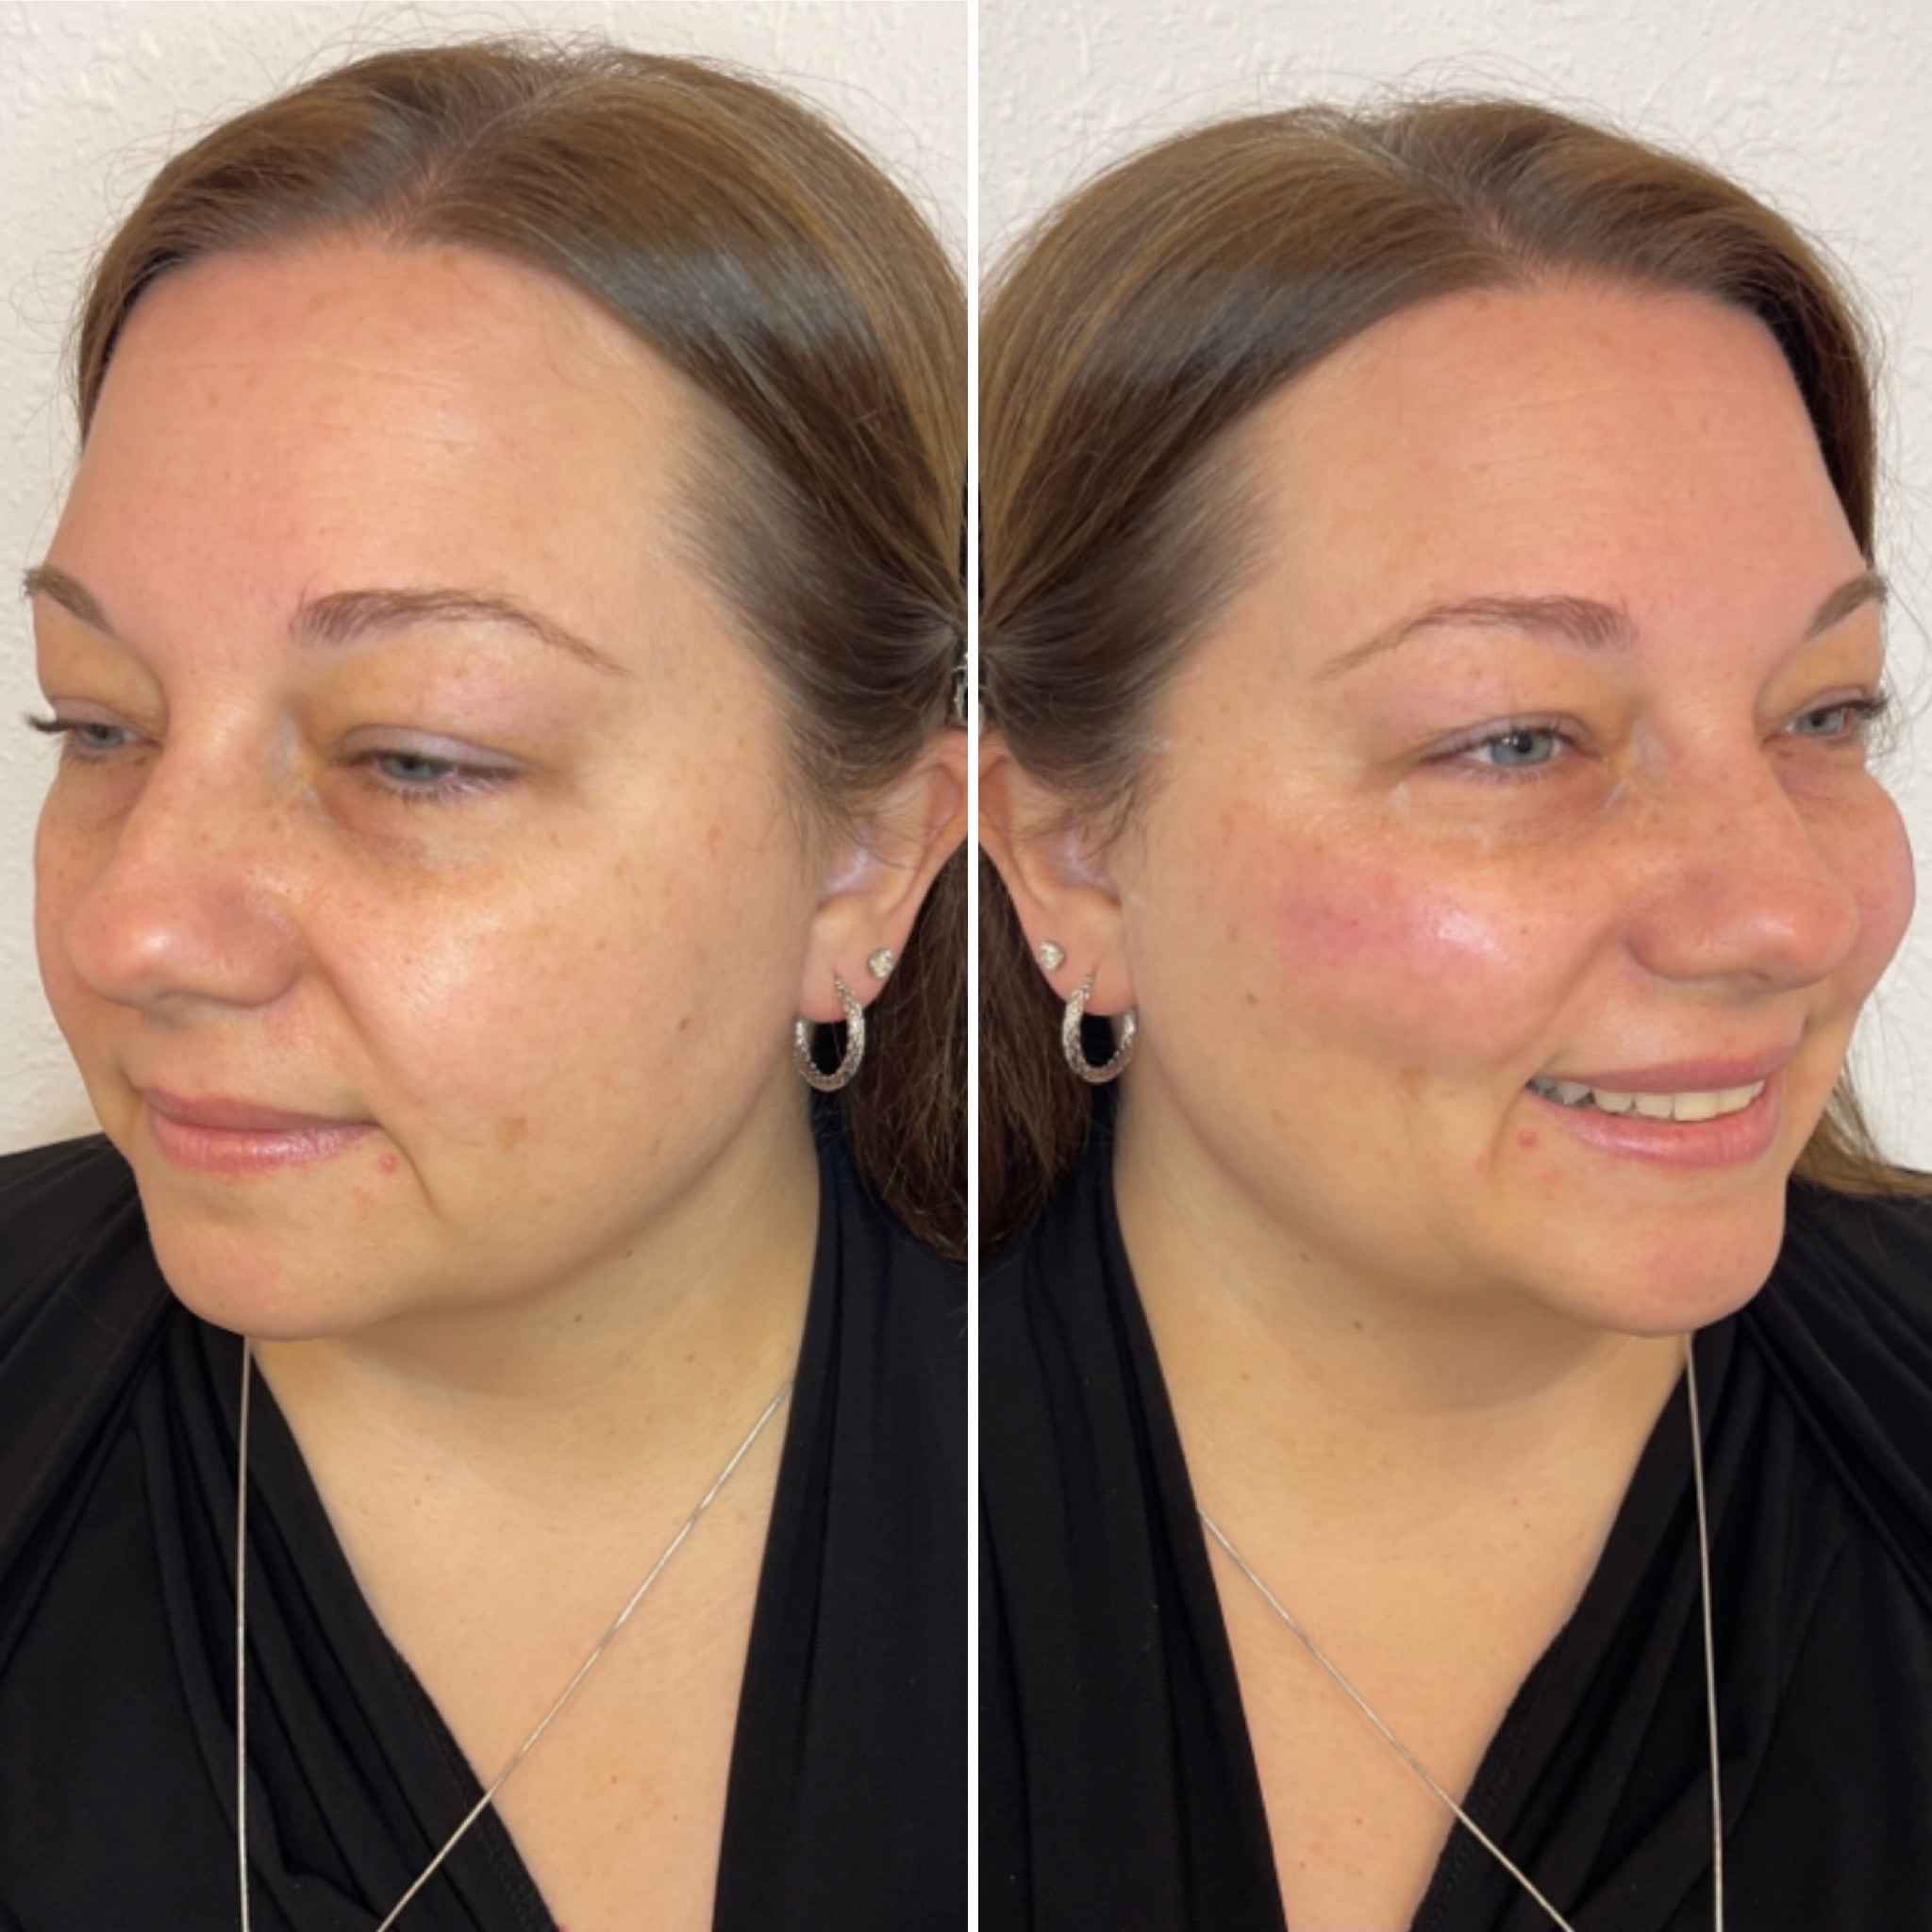 Smiley Face After Cheek Filler Treatment | Onyx Medical Aesthetics | Homann Dr. S.E. suite B Lacey, WA